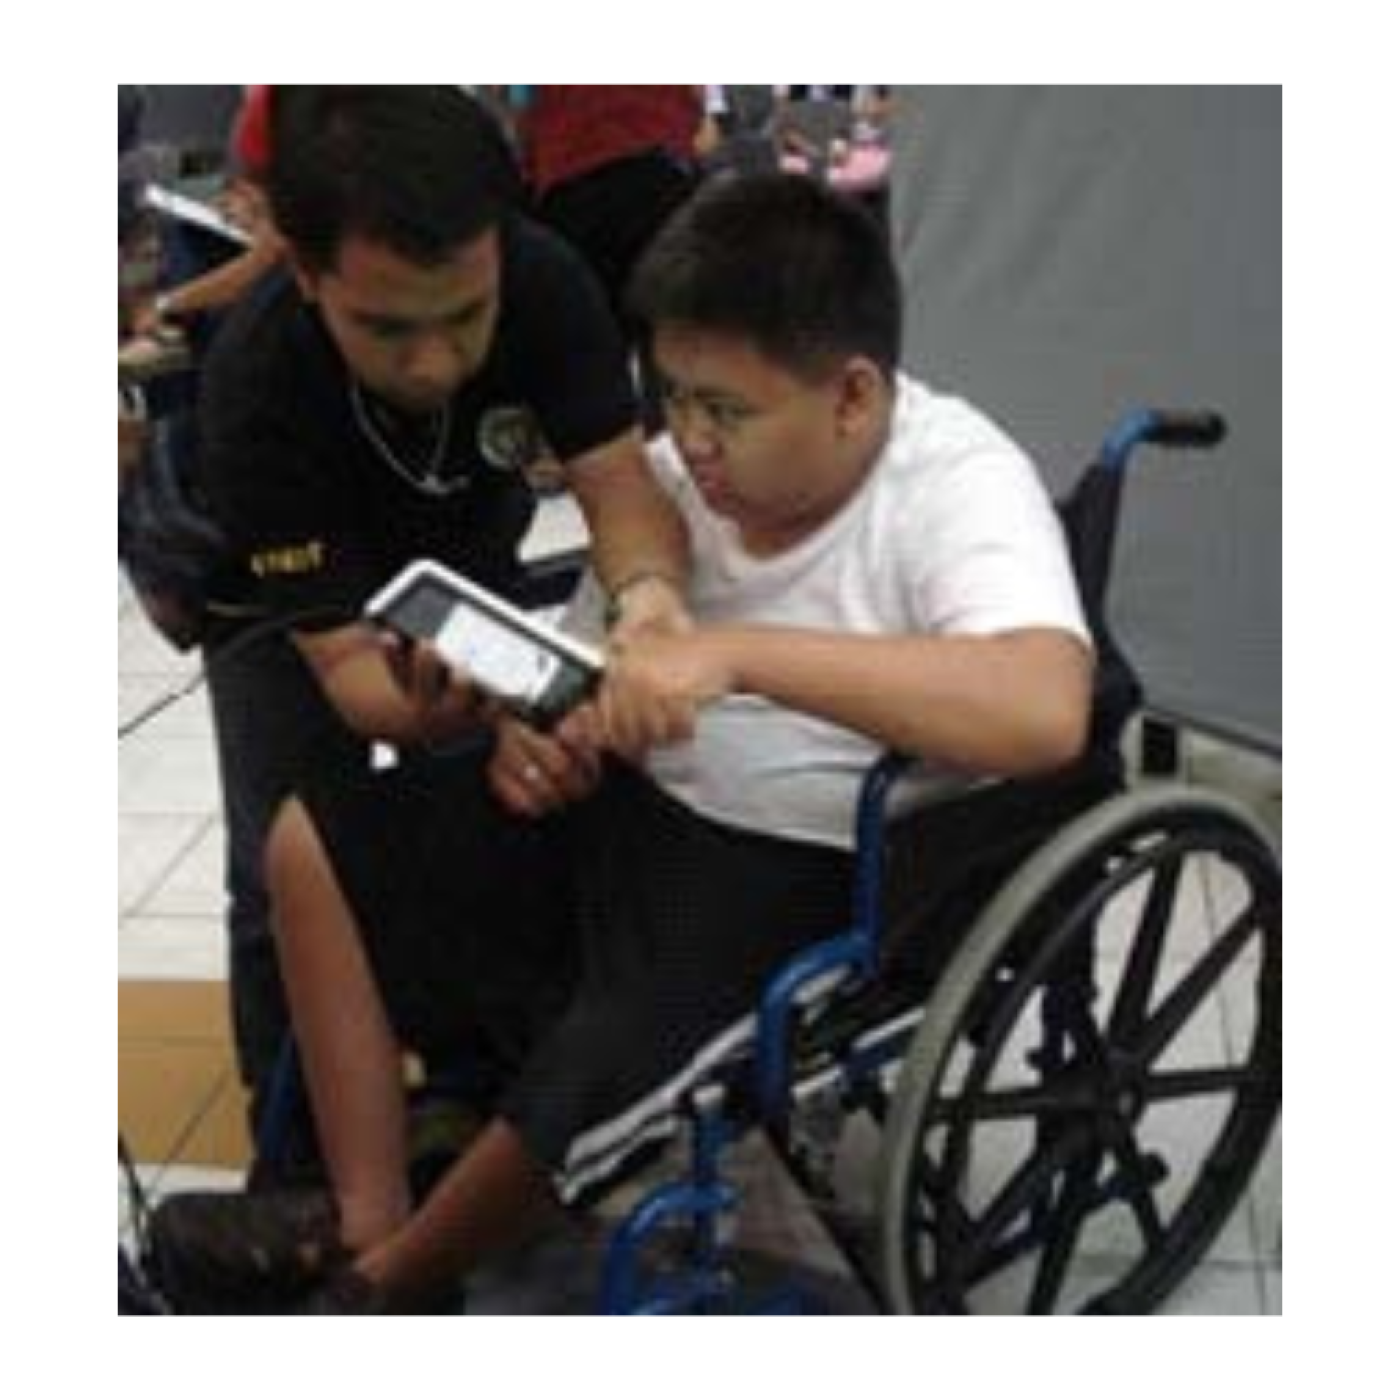 A young man who uses a wheelchair uses a biometric voter registration machine in the Philippines